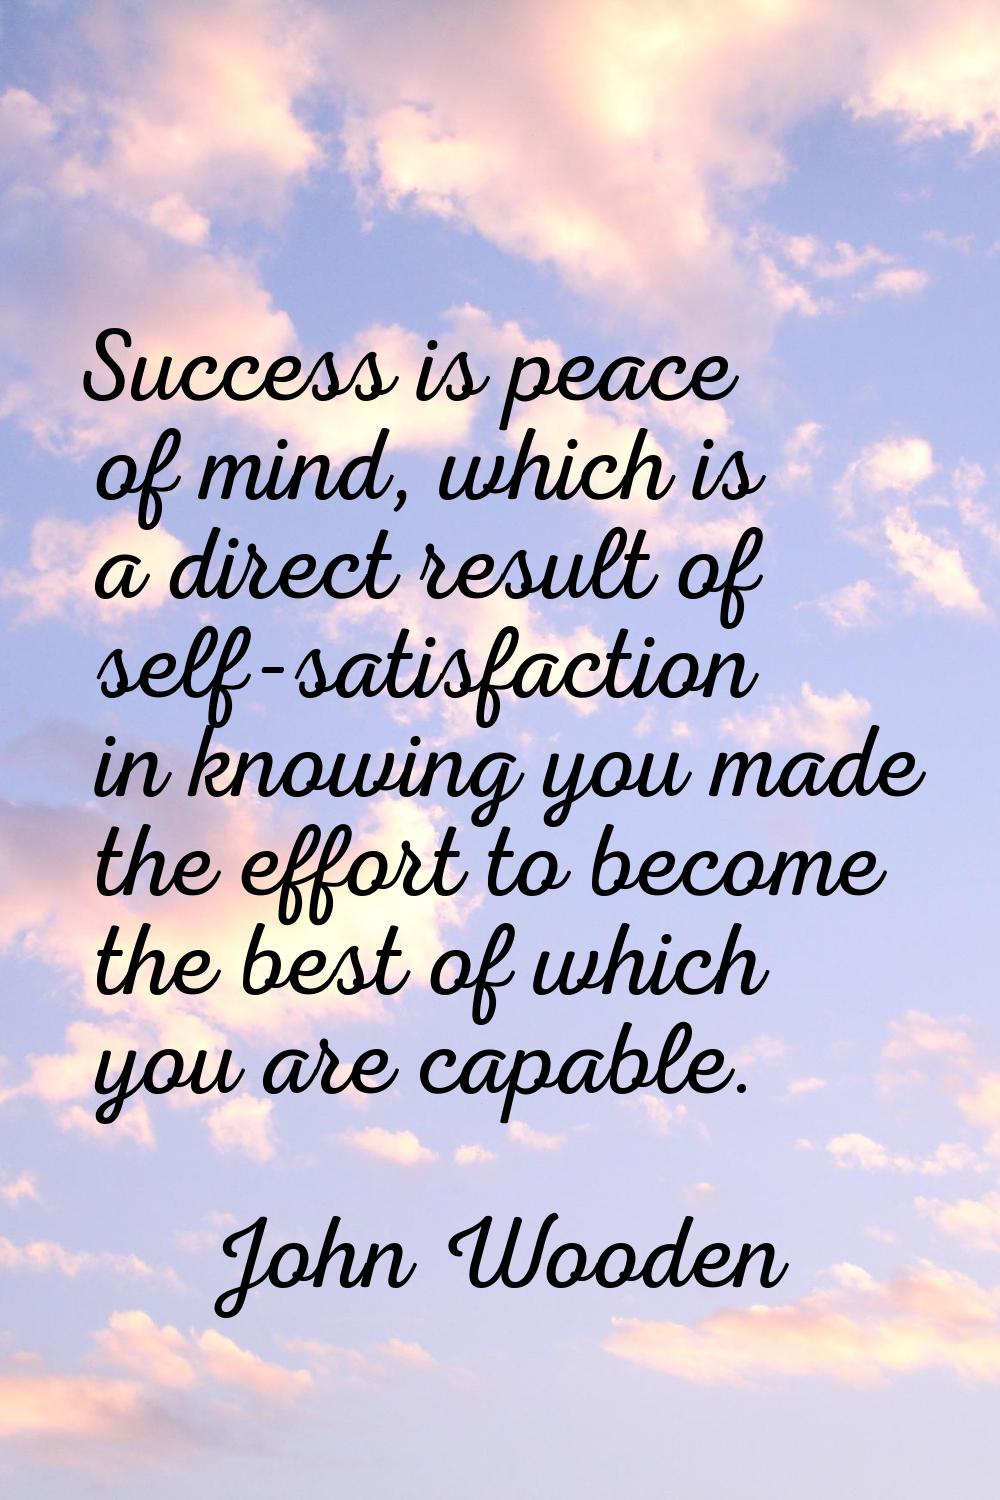 Success is peace of mind, which is a direct result of self-satisfaction in knowing you made the eff